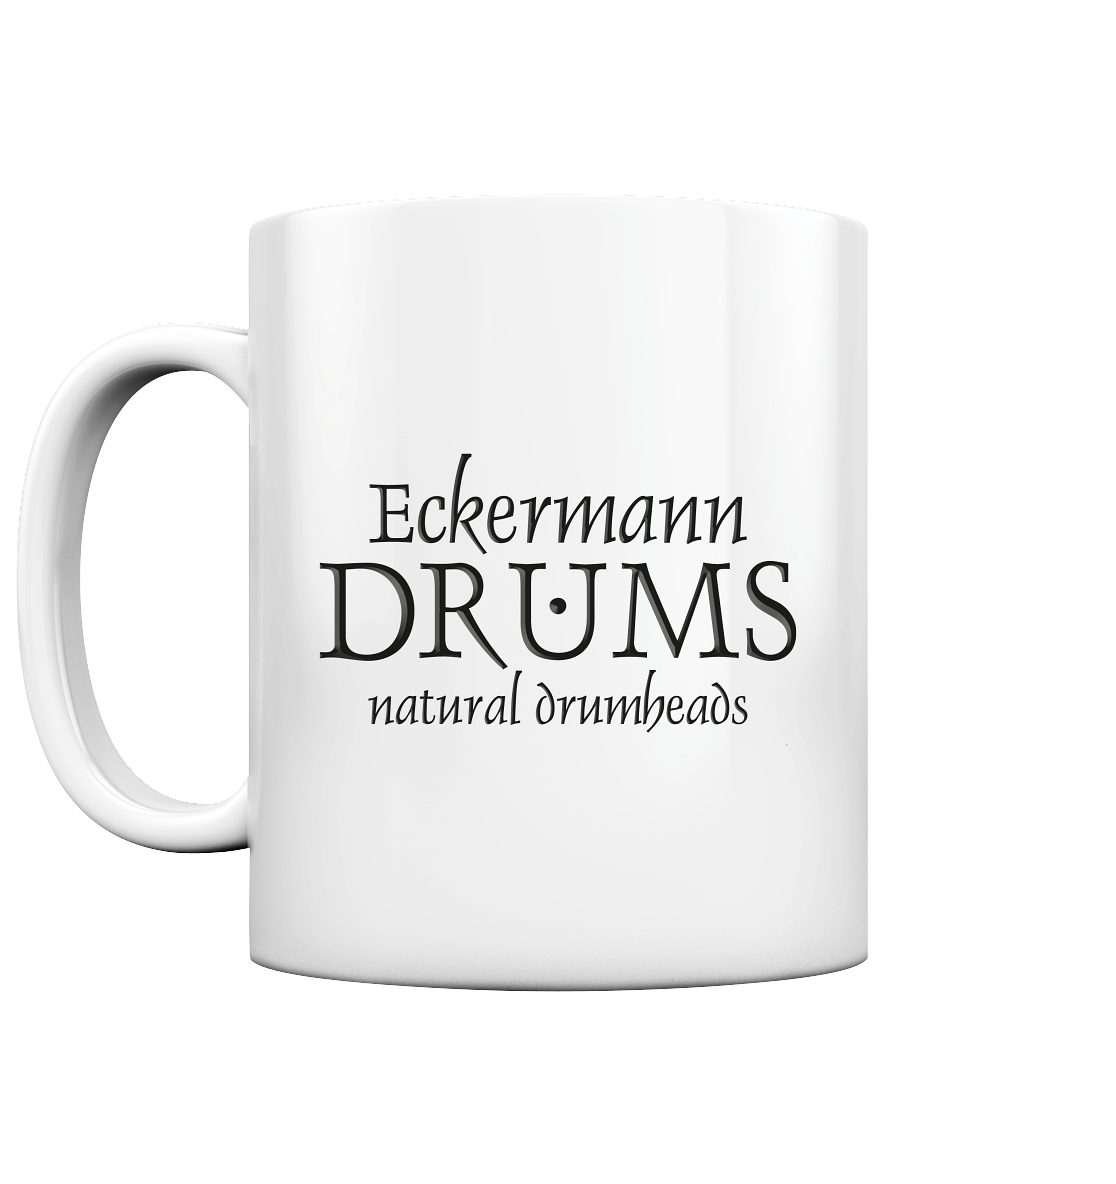 Eckermann DRUMS - "From Another World" - Tasse glossy